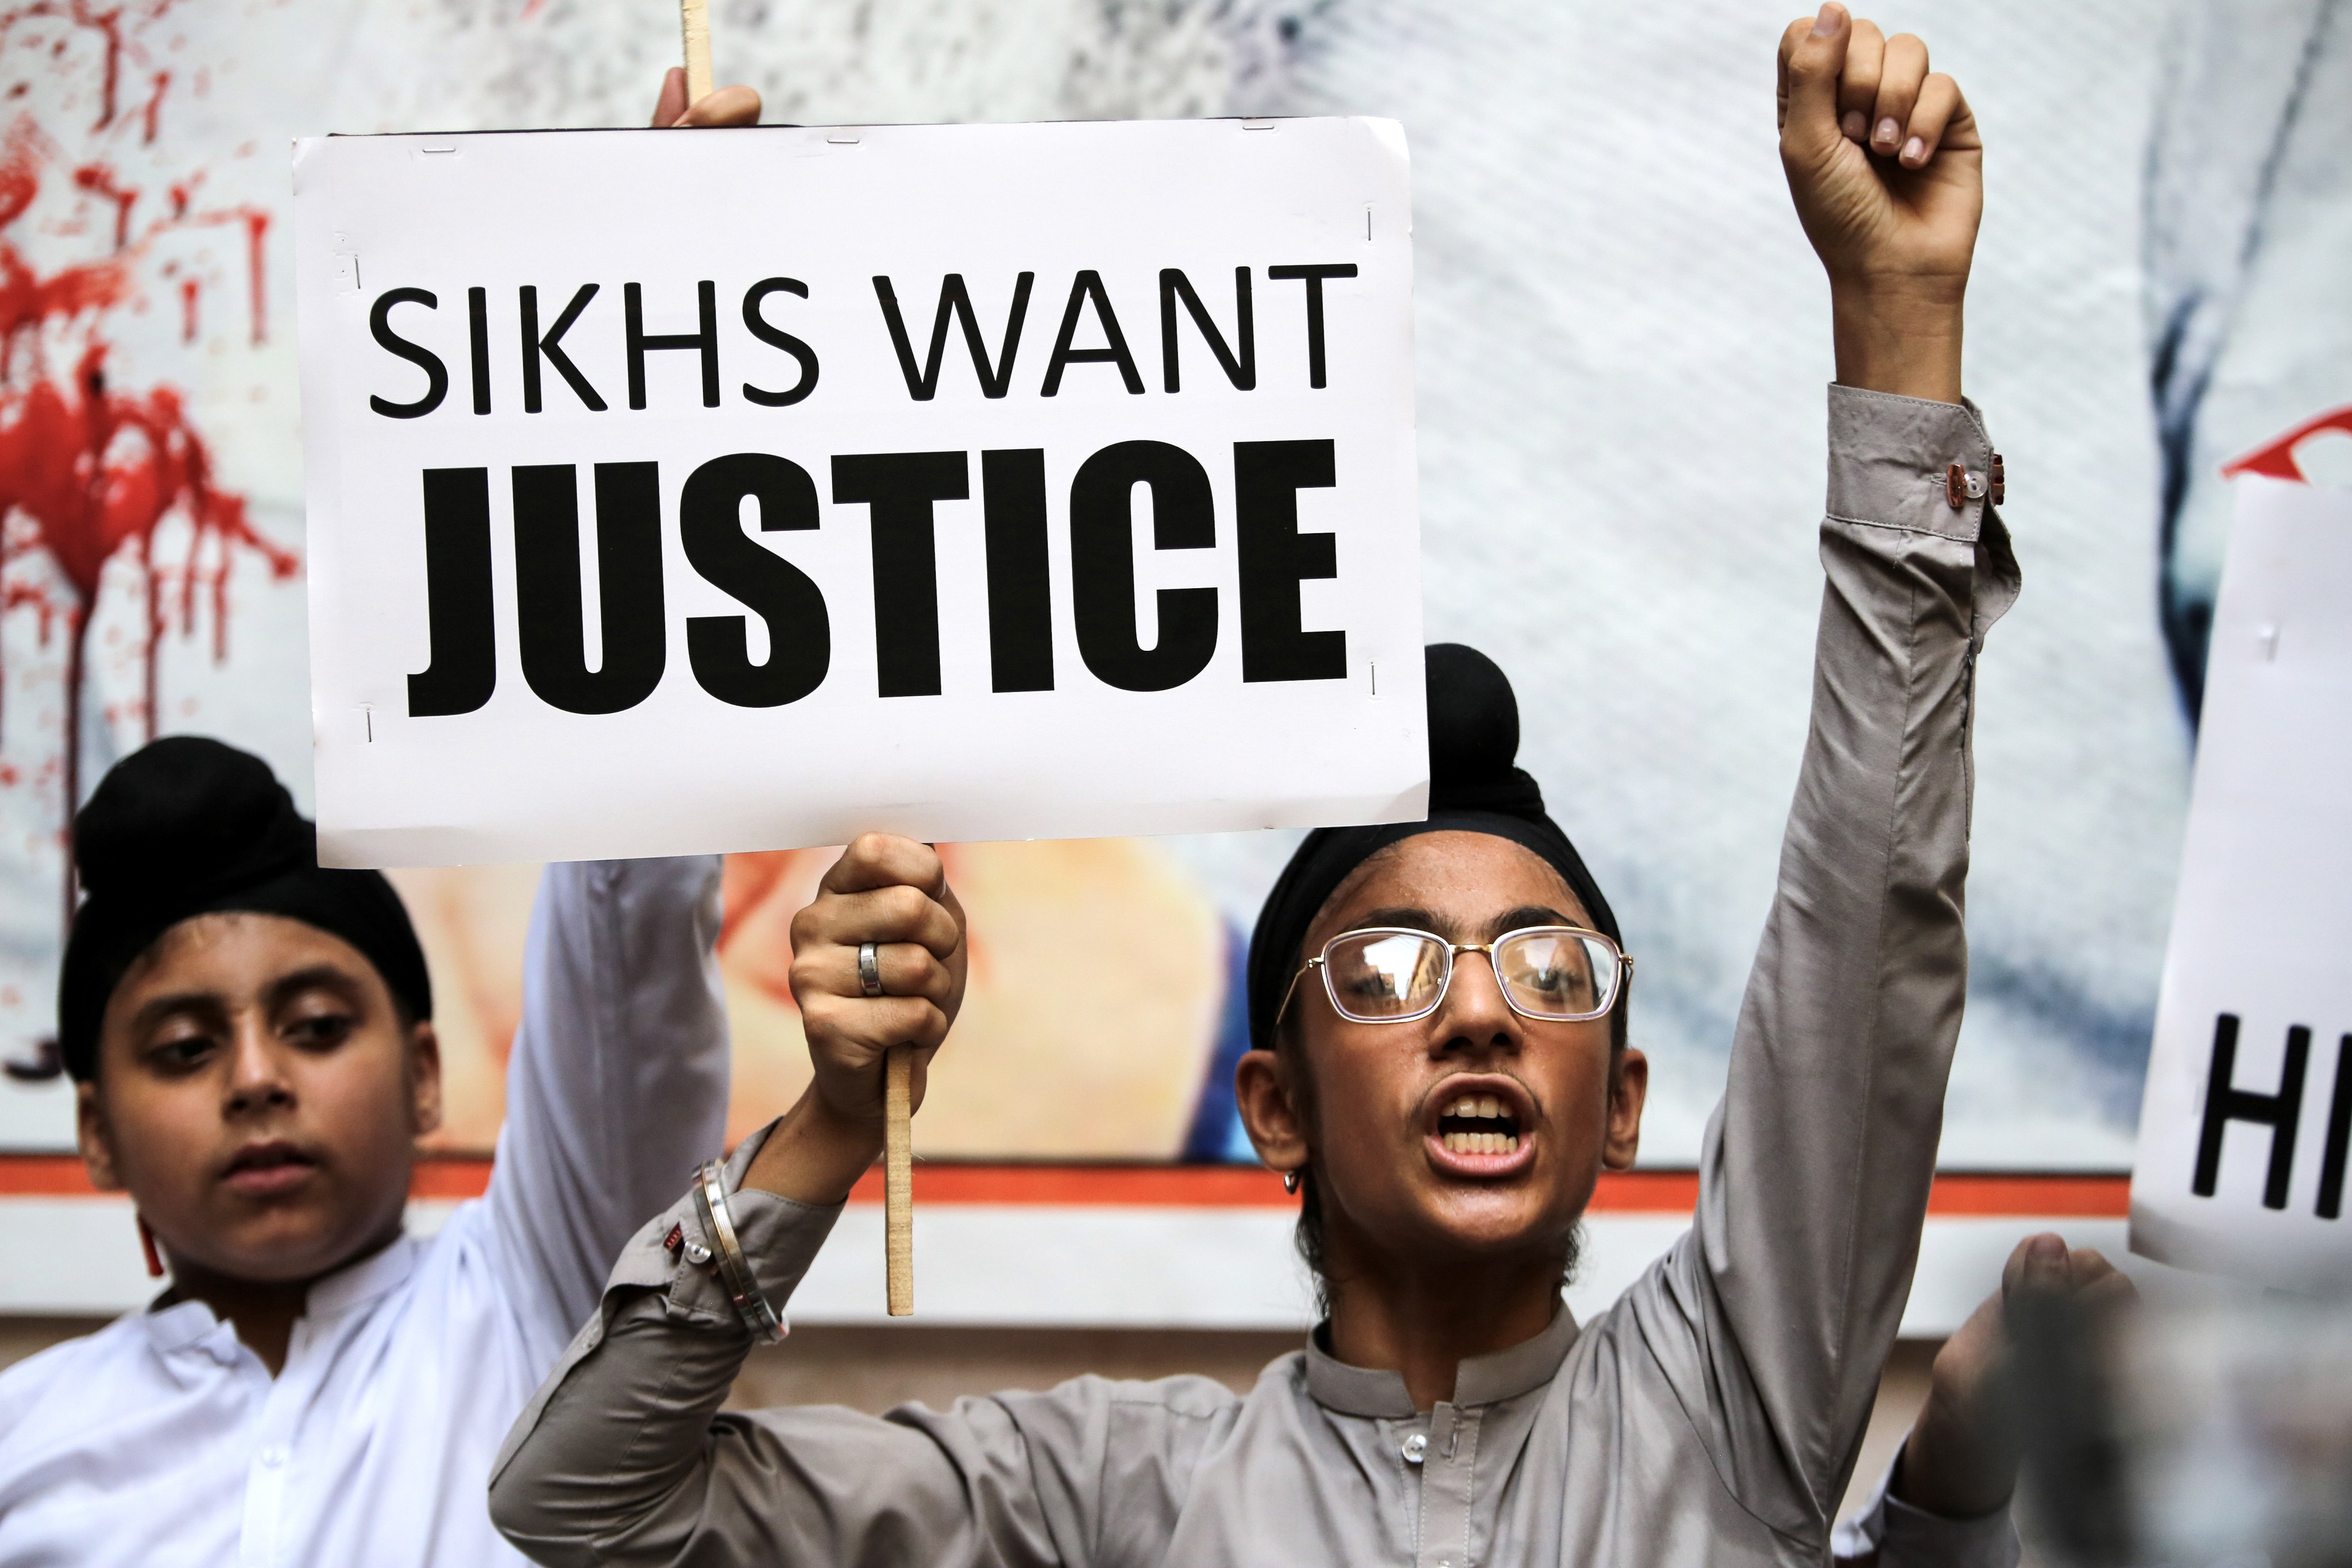 Young members of Pakistan’s Sikh minority group protest against India in Lahore over the murder of Hardeep Singh Nijjar in Canada. Photo: EPA-EFE